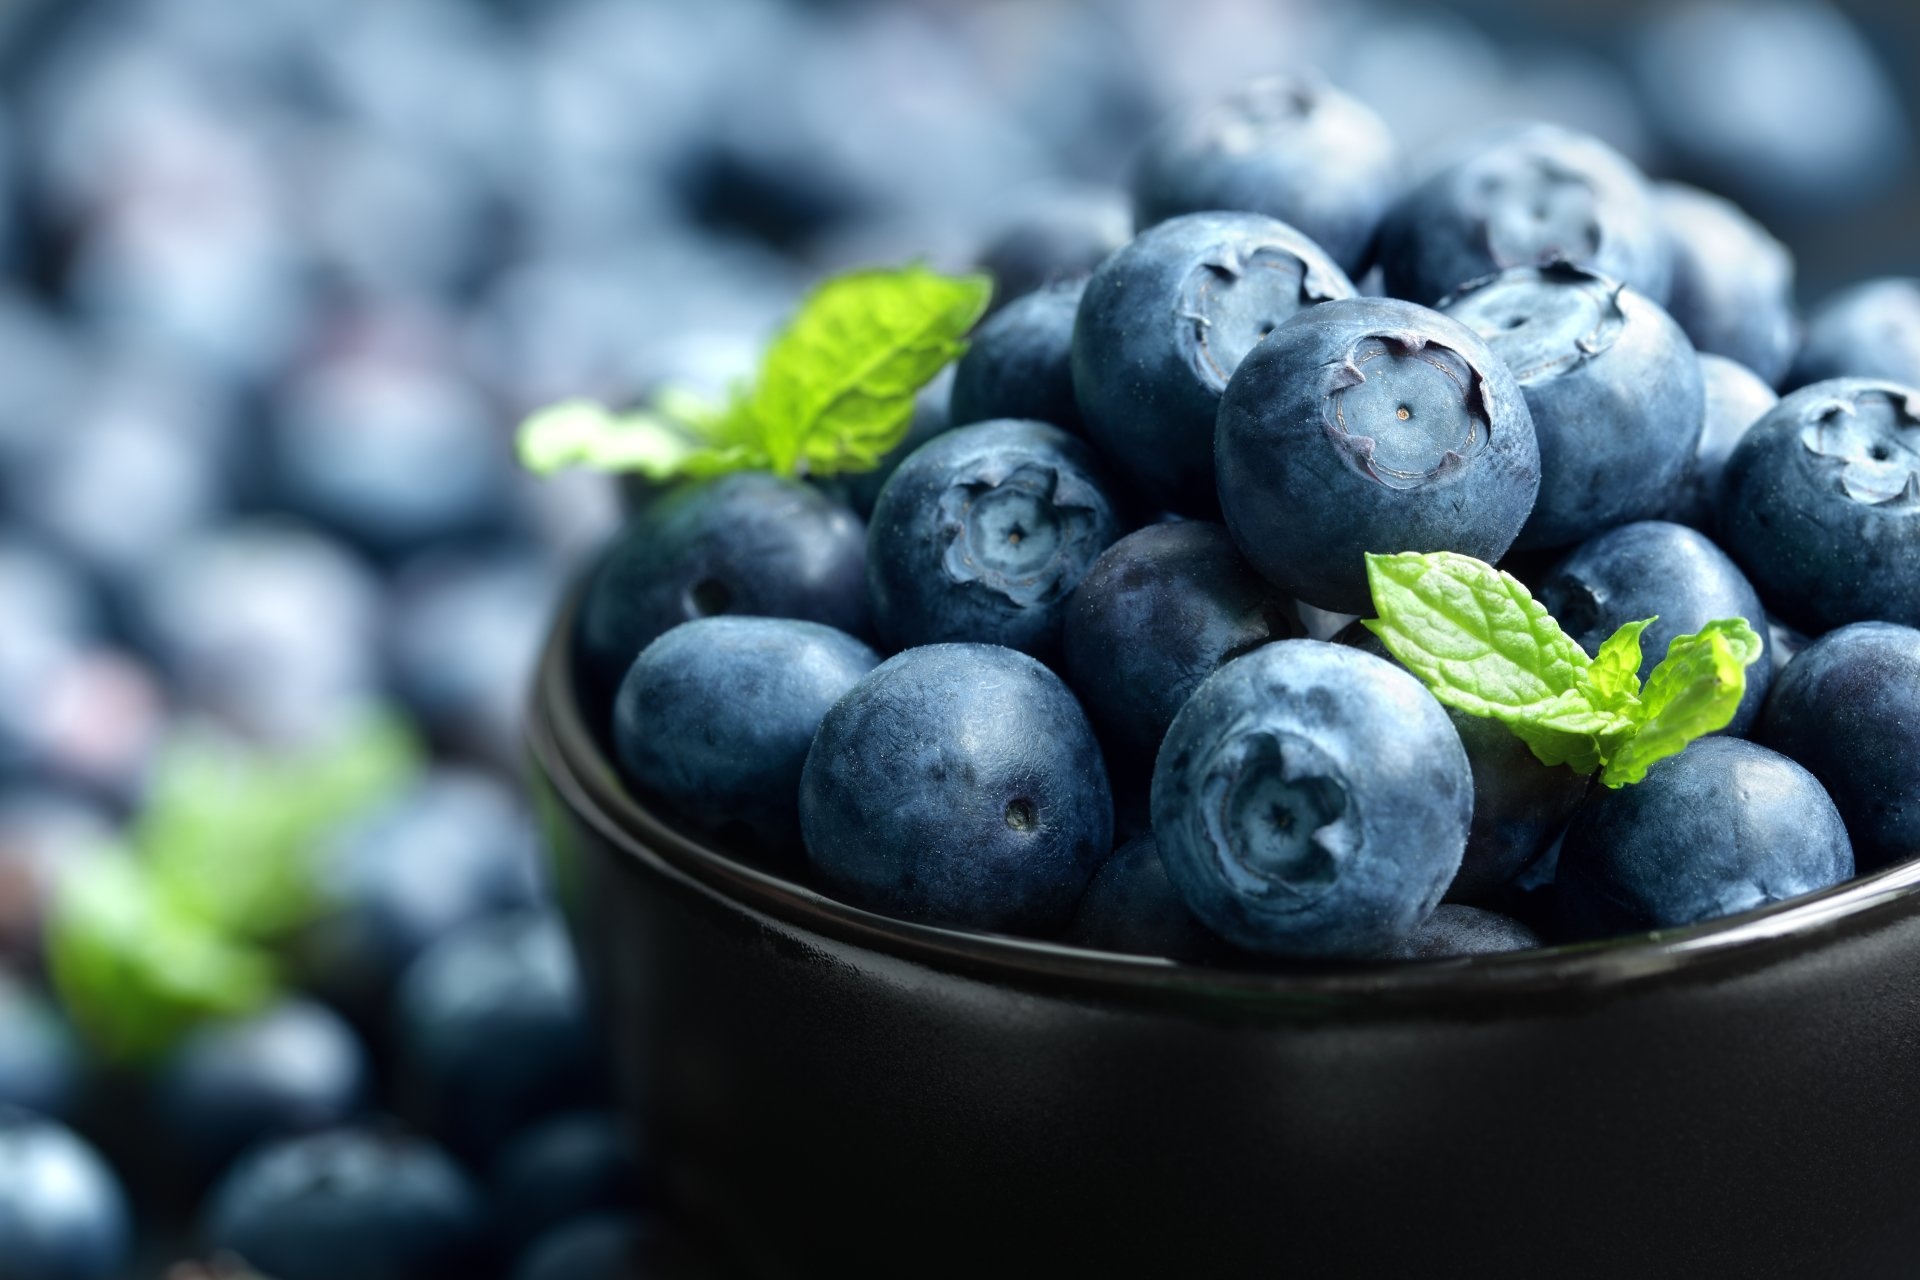 Huckleberry: A blue-colored berry, Has a sweet albeit acidic taste. 1920x1280 HD Wallpaper.